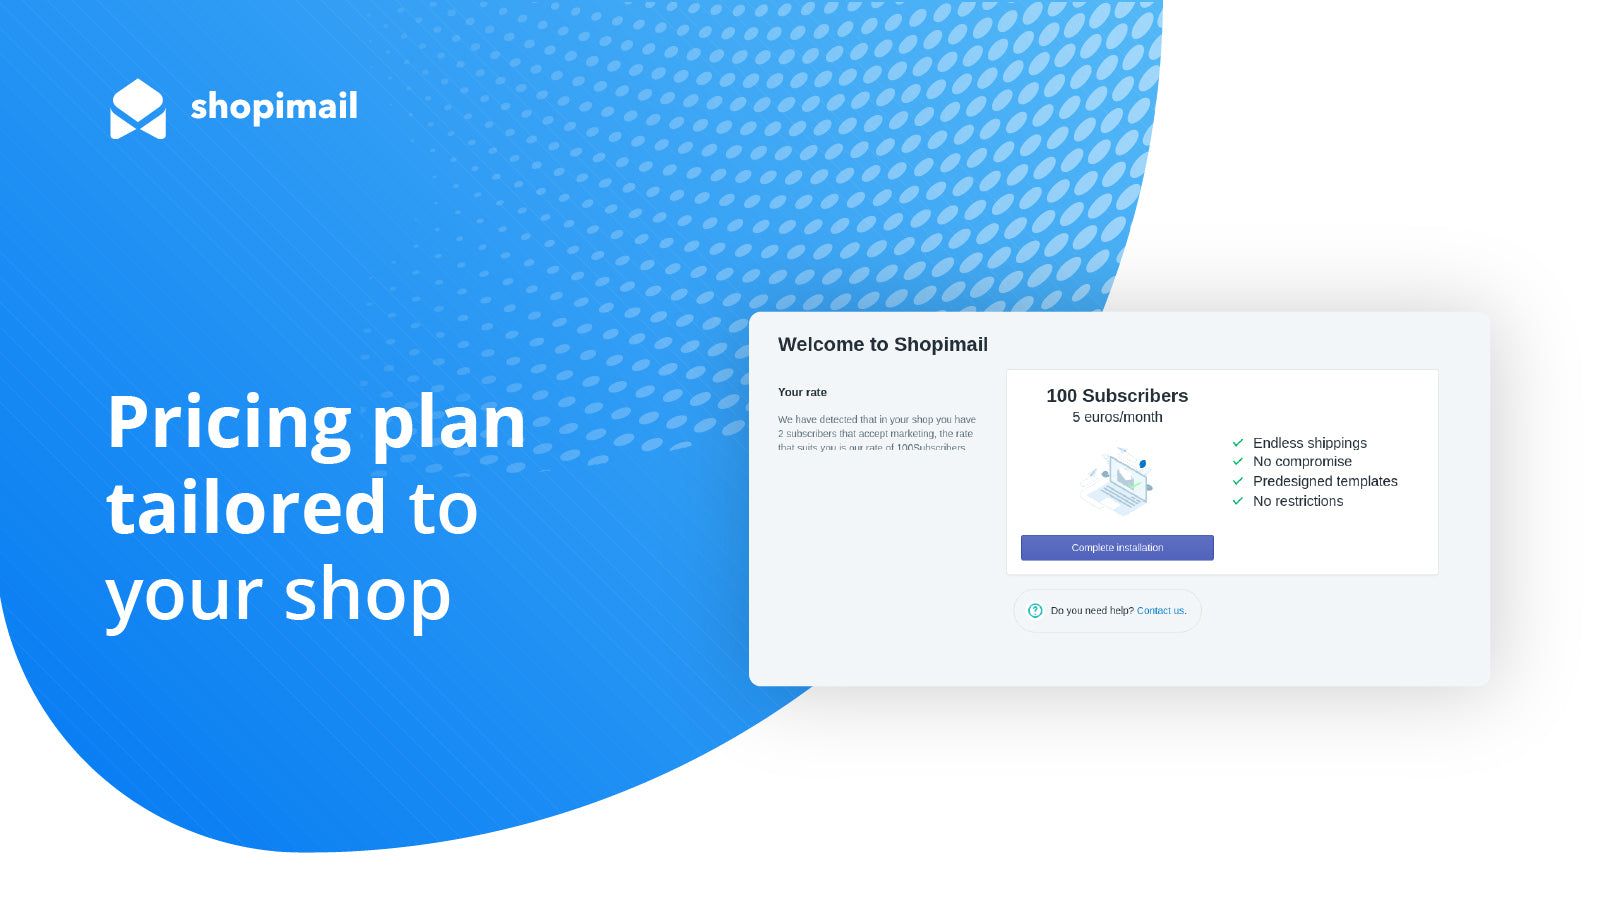 Pricing plan tailored to your shop